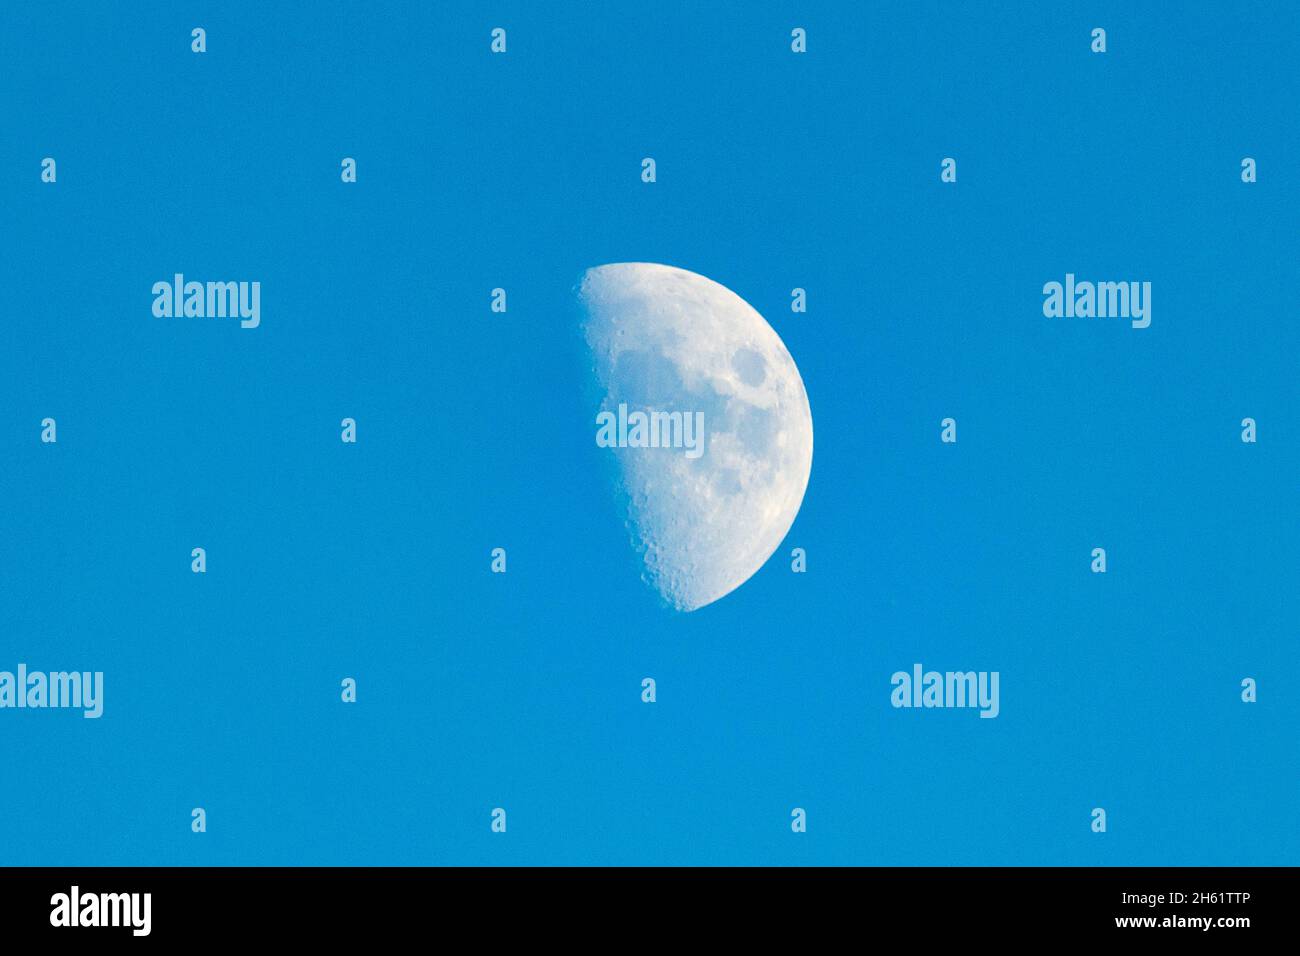 Bright crescent moon over the completely blue sky. Horizontal photography. Stock Photo